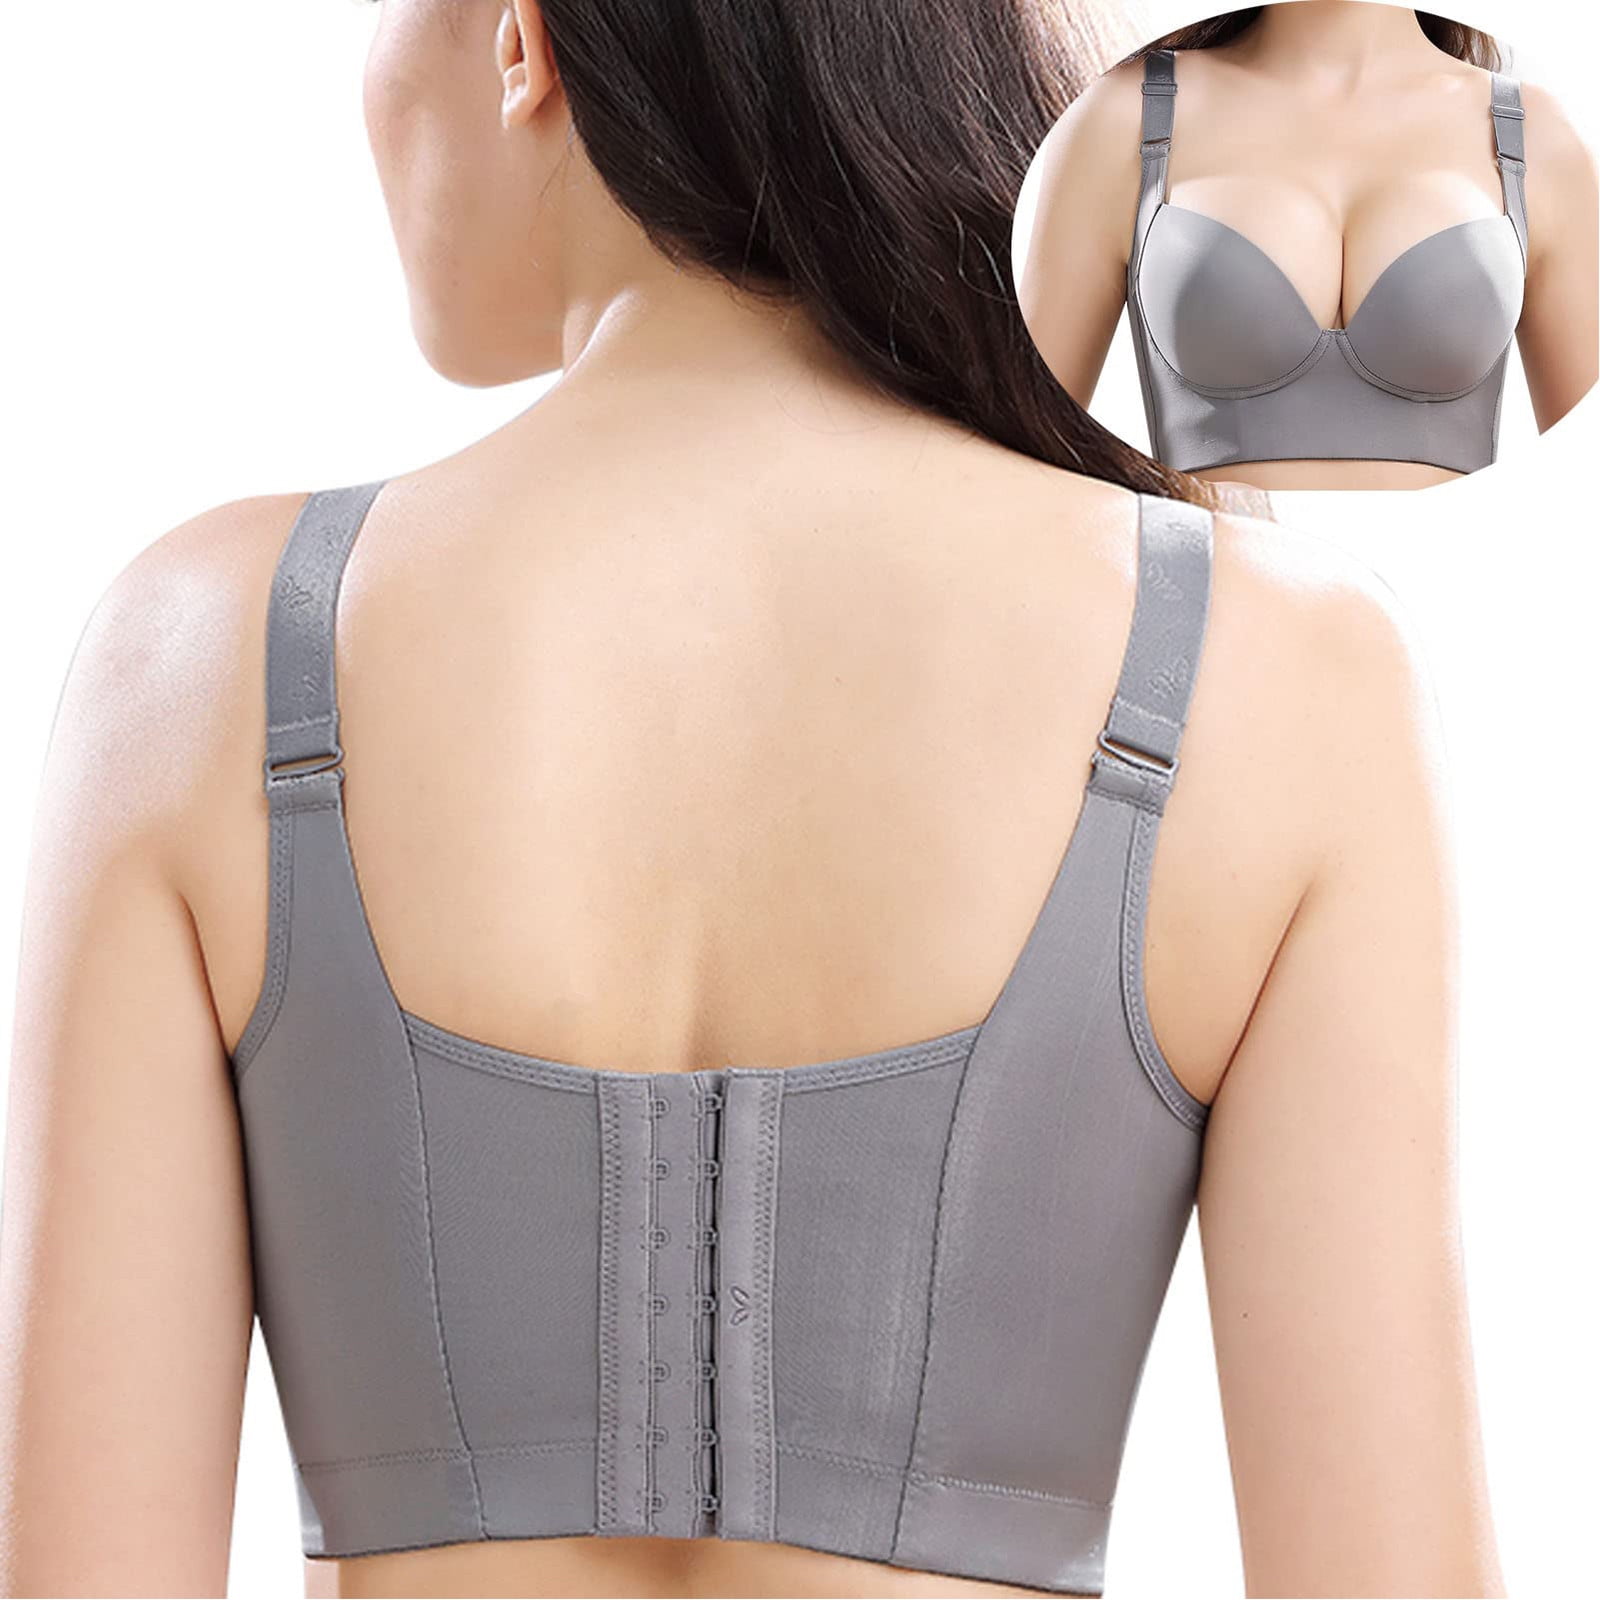 TOWED22 Plus Size Bras,Women's High Impact Removable Pads Sports Bra  Underwire Full Coverage Support Workout Running Bra,Grey